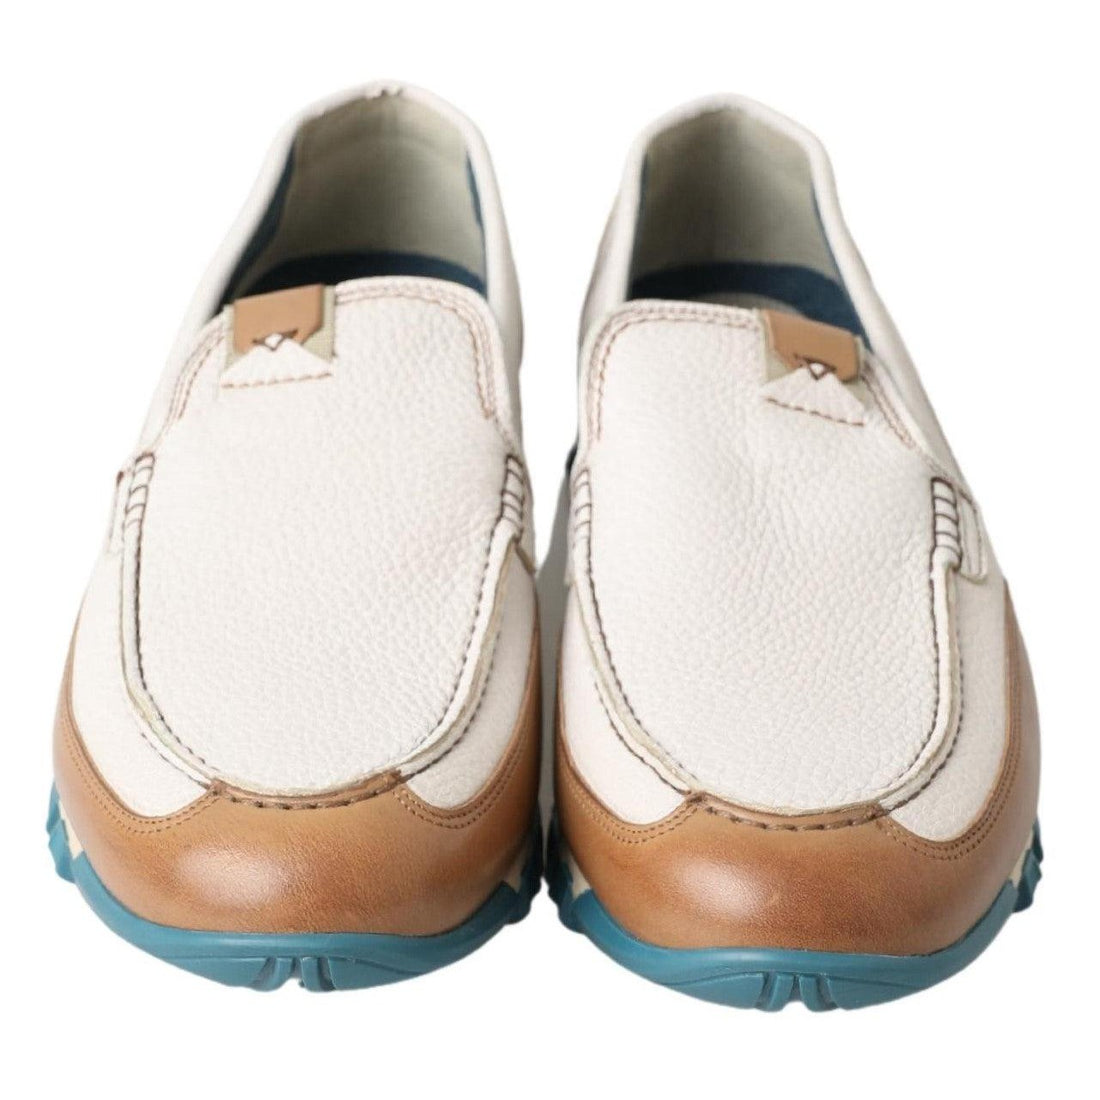 Dolce & Gabbana White Leather Loafers Moccasins Shoes